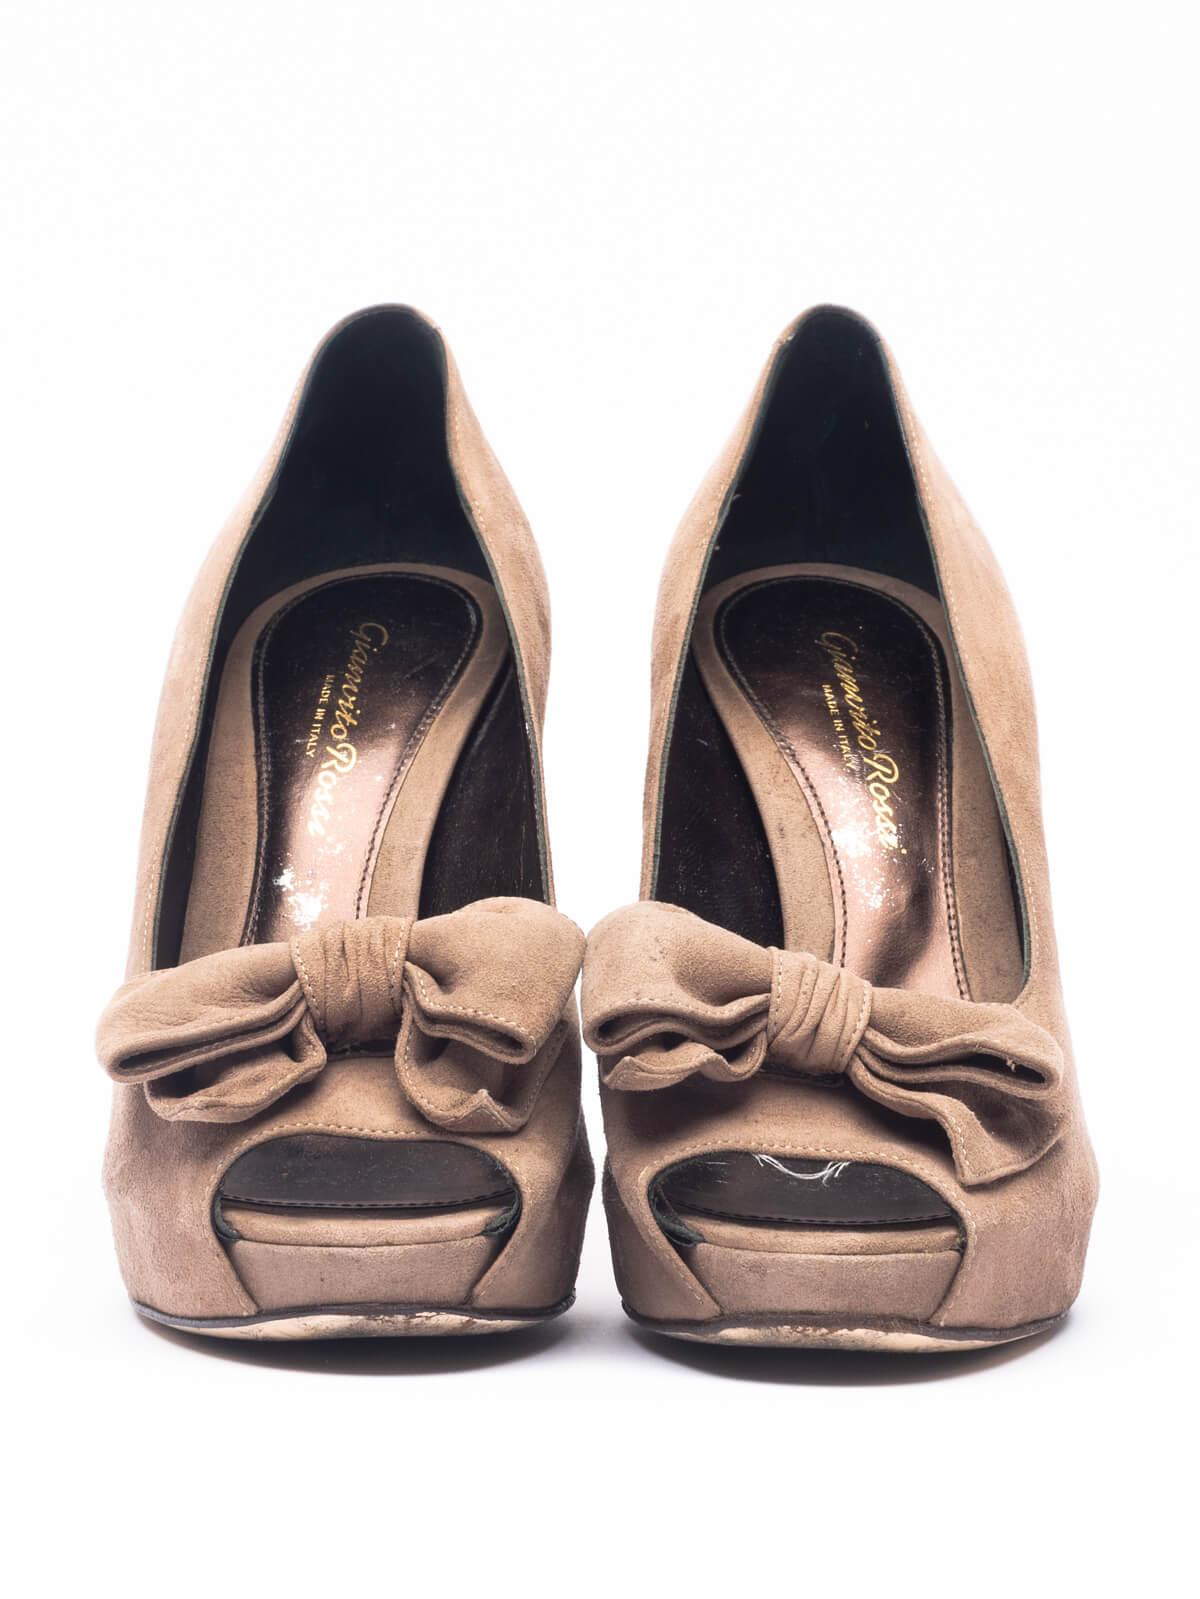 Gianvito Rossi Women's Beige Suede Peep Toe Heels with Bow Detail In Excellent Condition In London, GB